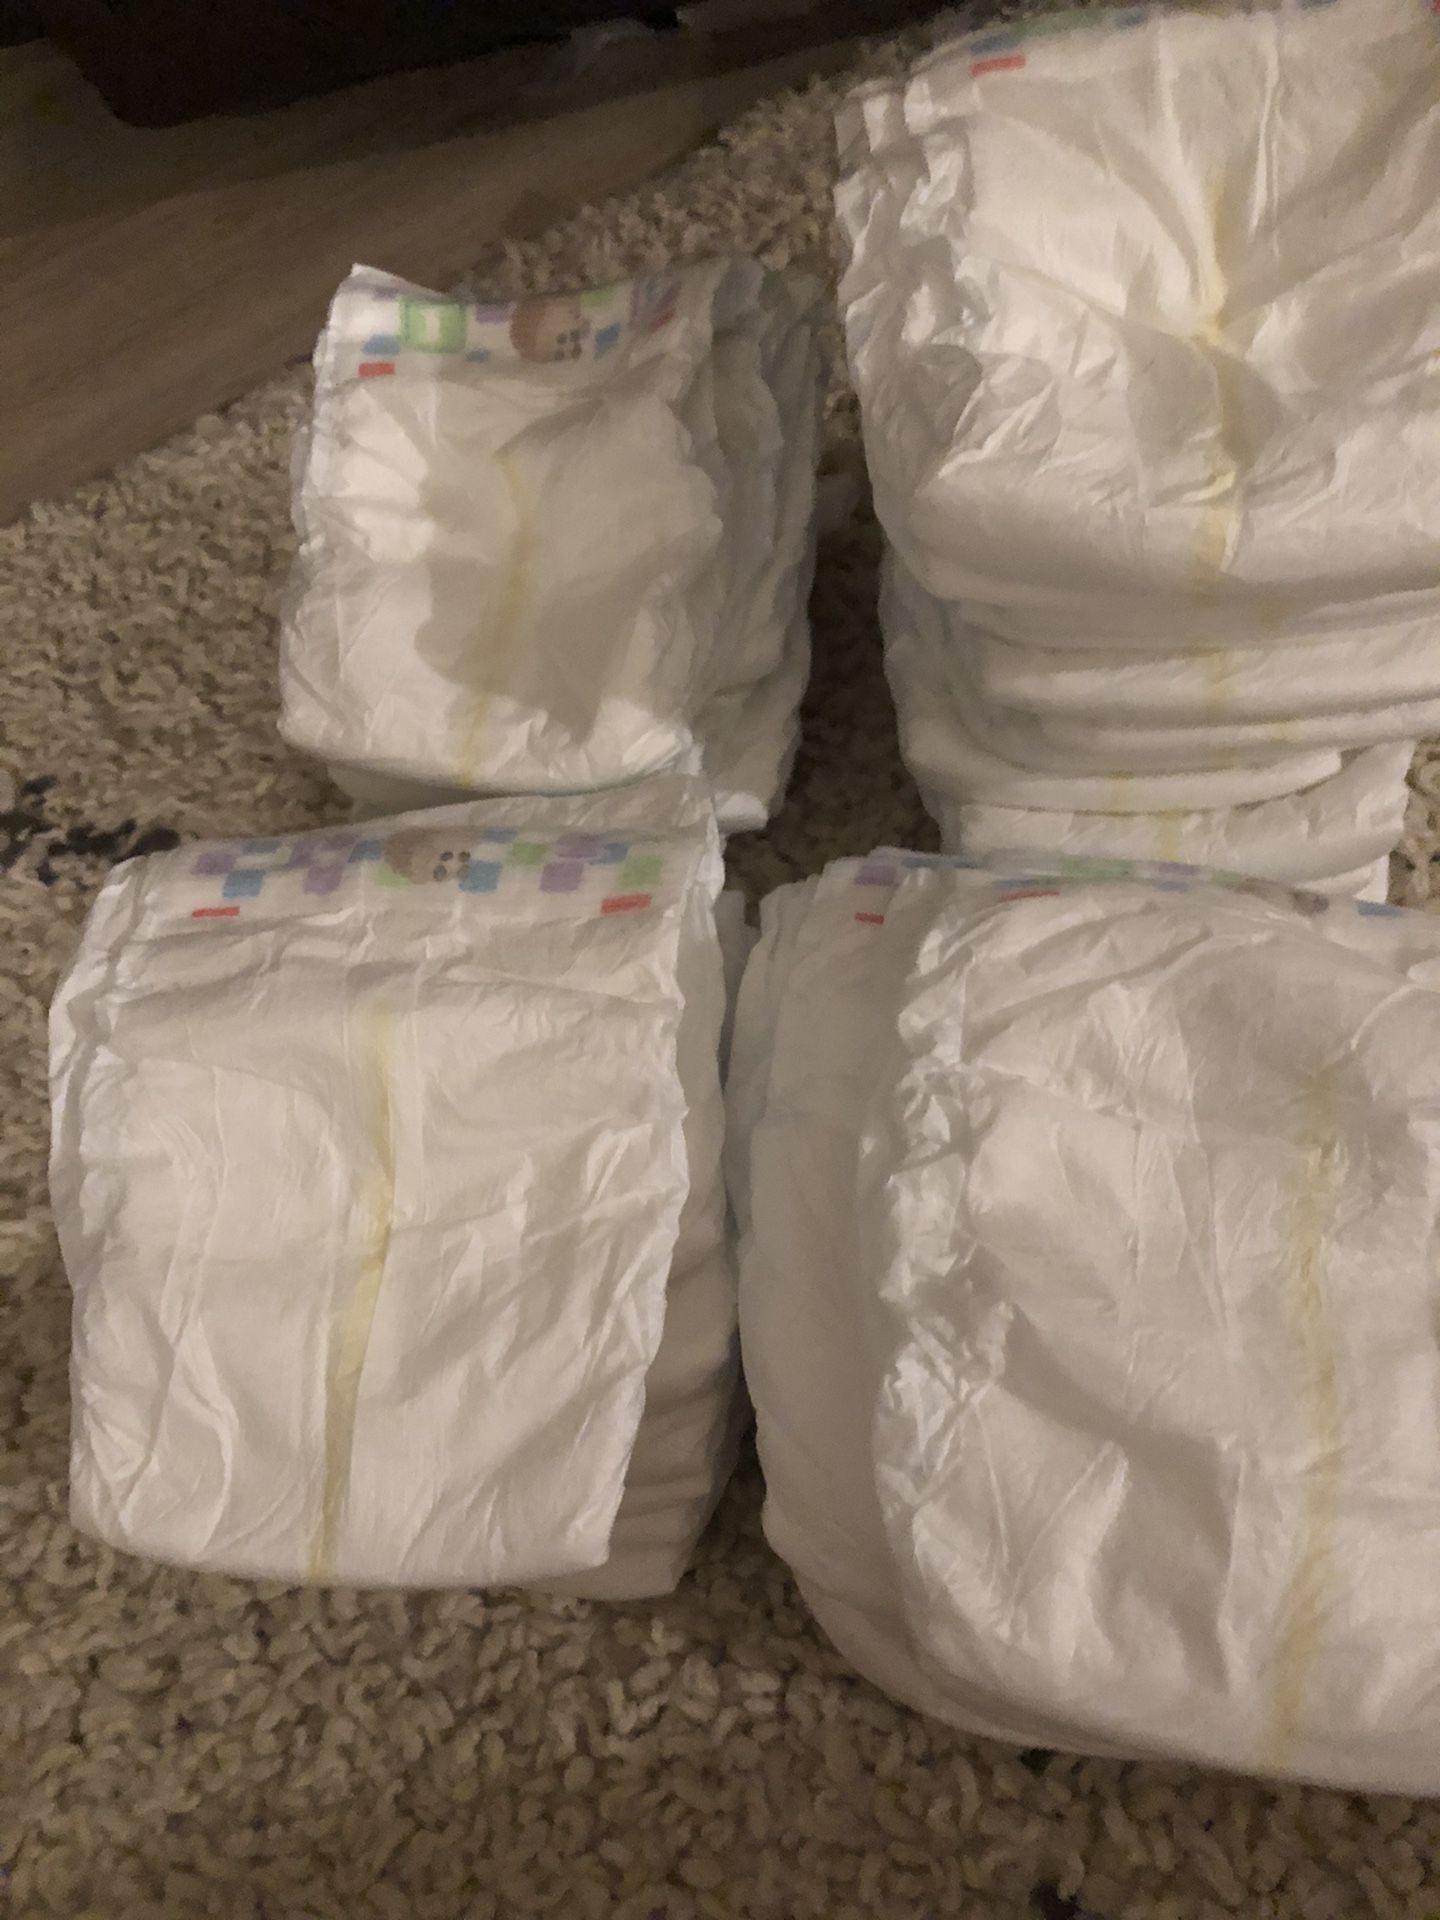 39 size 1 diapers